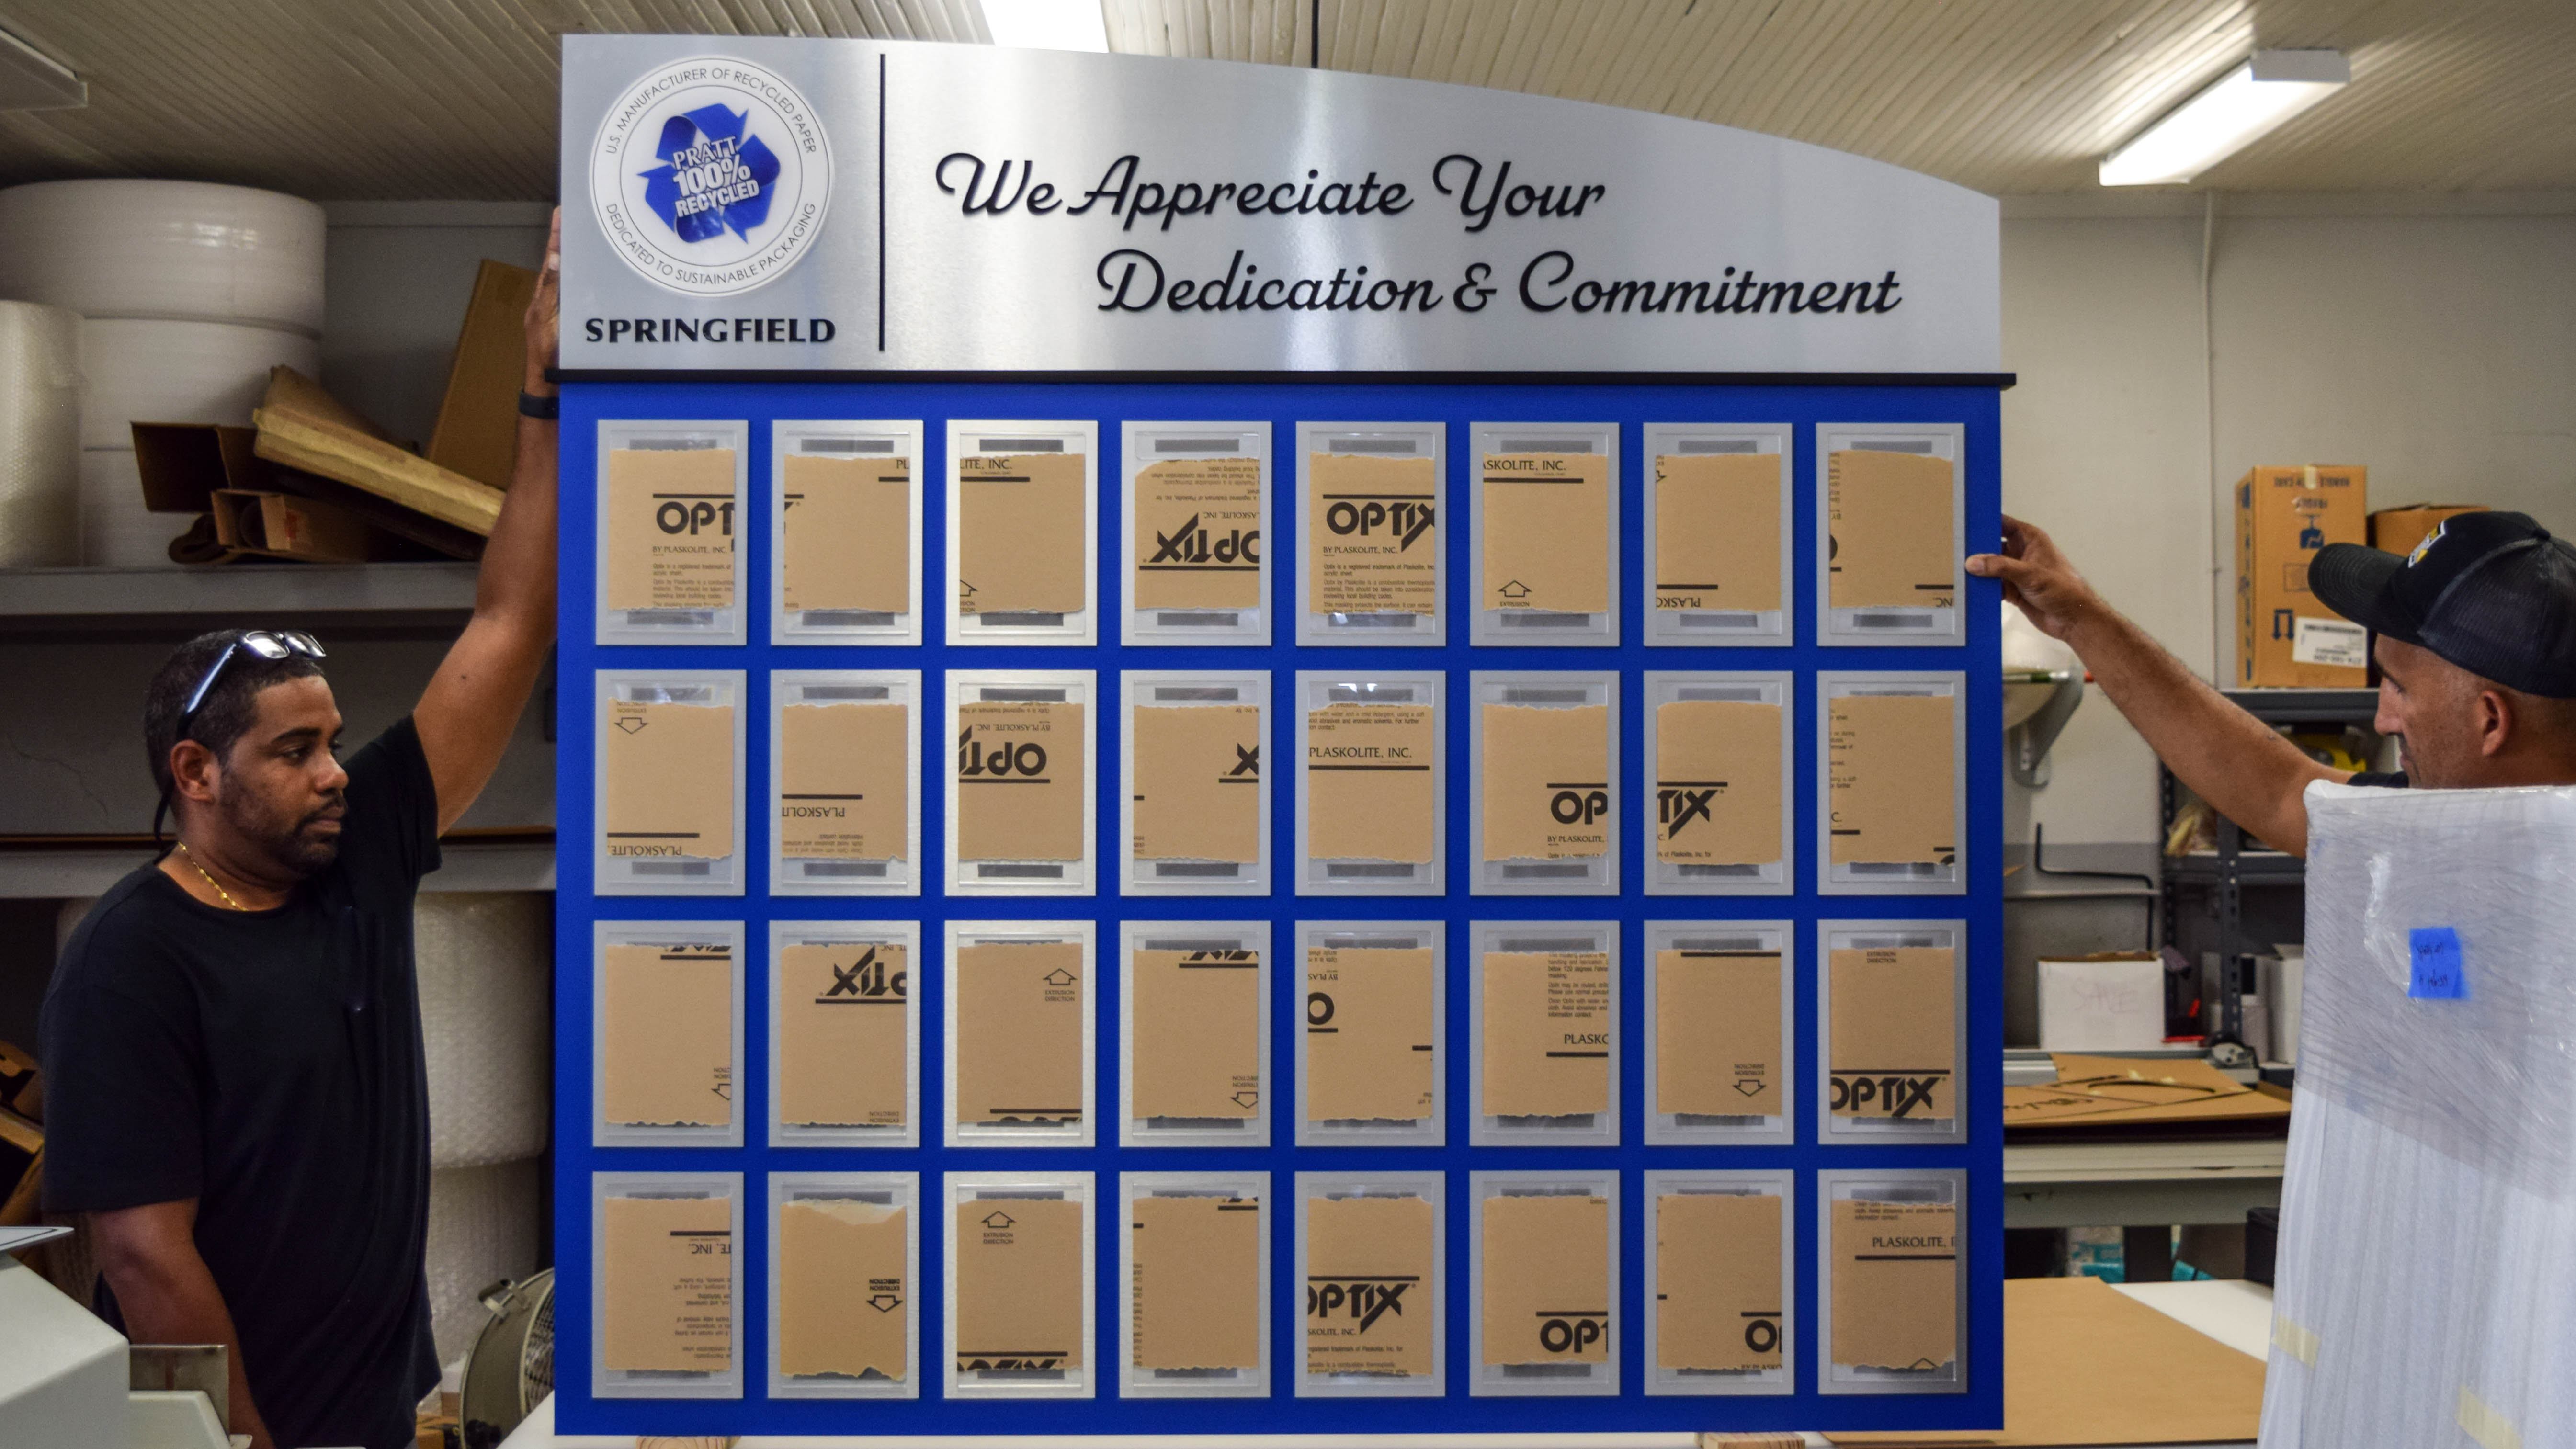 Employee recognition wall for Pratt Industries